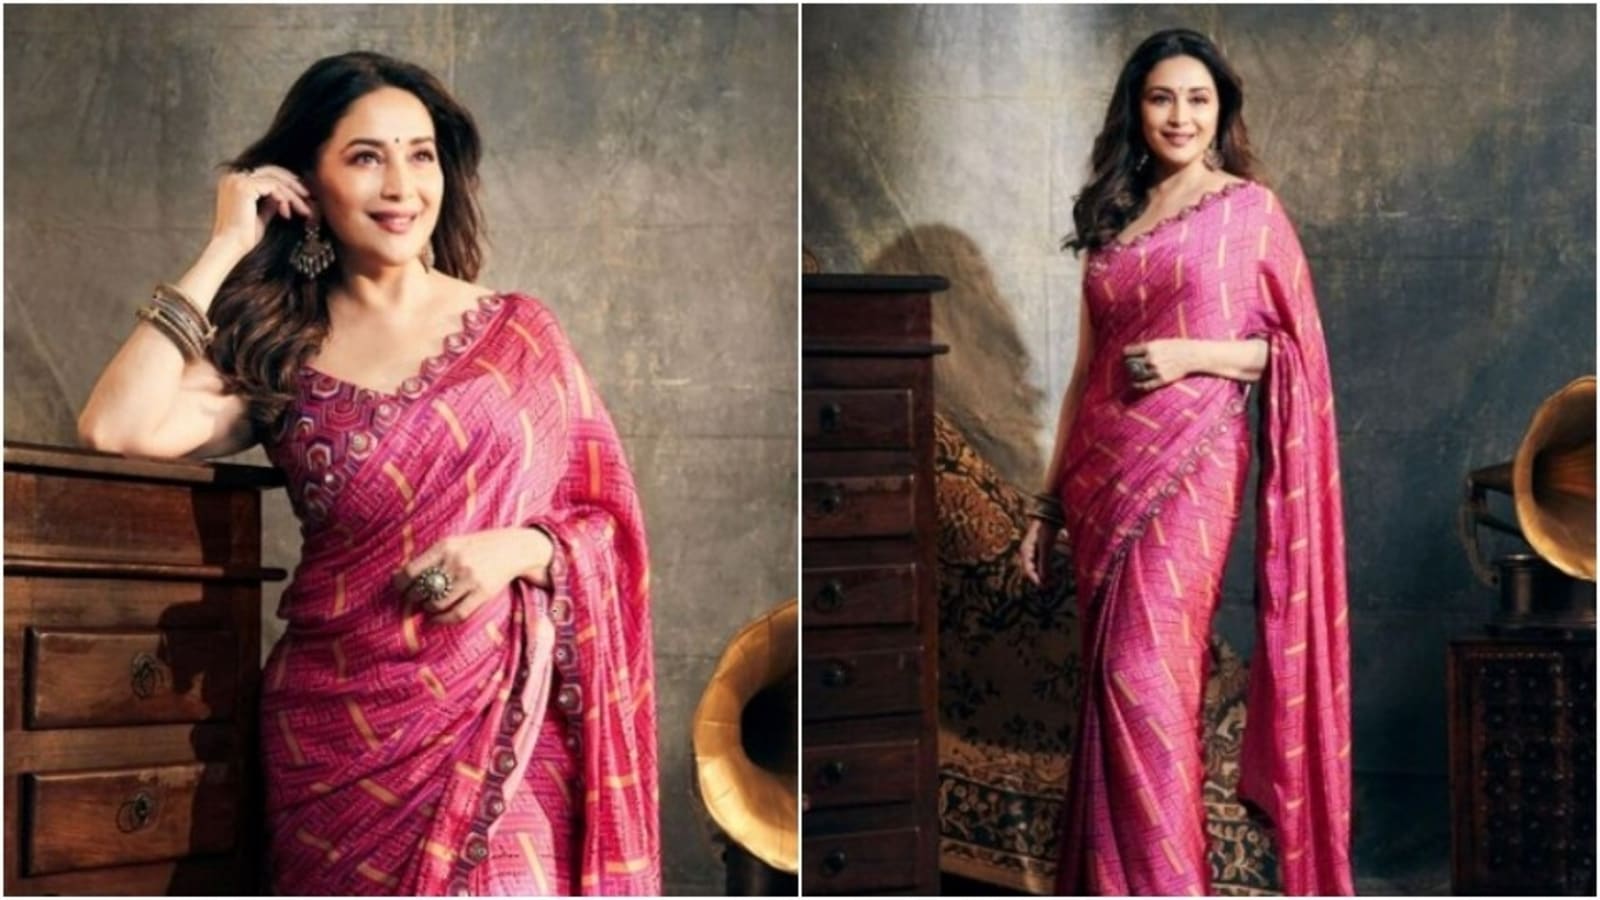 Madhuri Dixit, in a pink chiffon saree, is dressed as a daydream